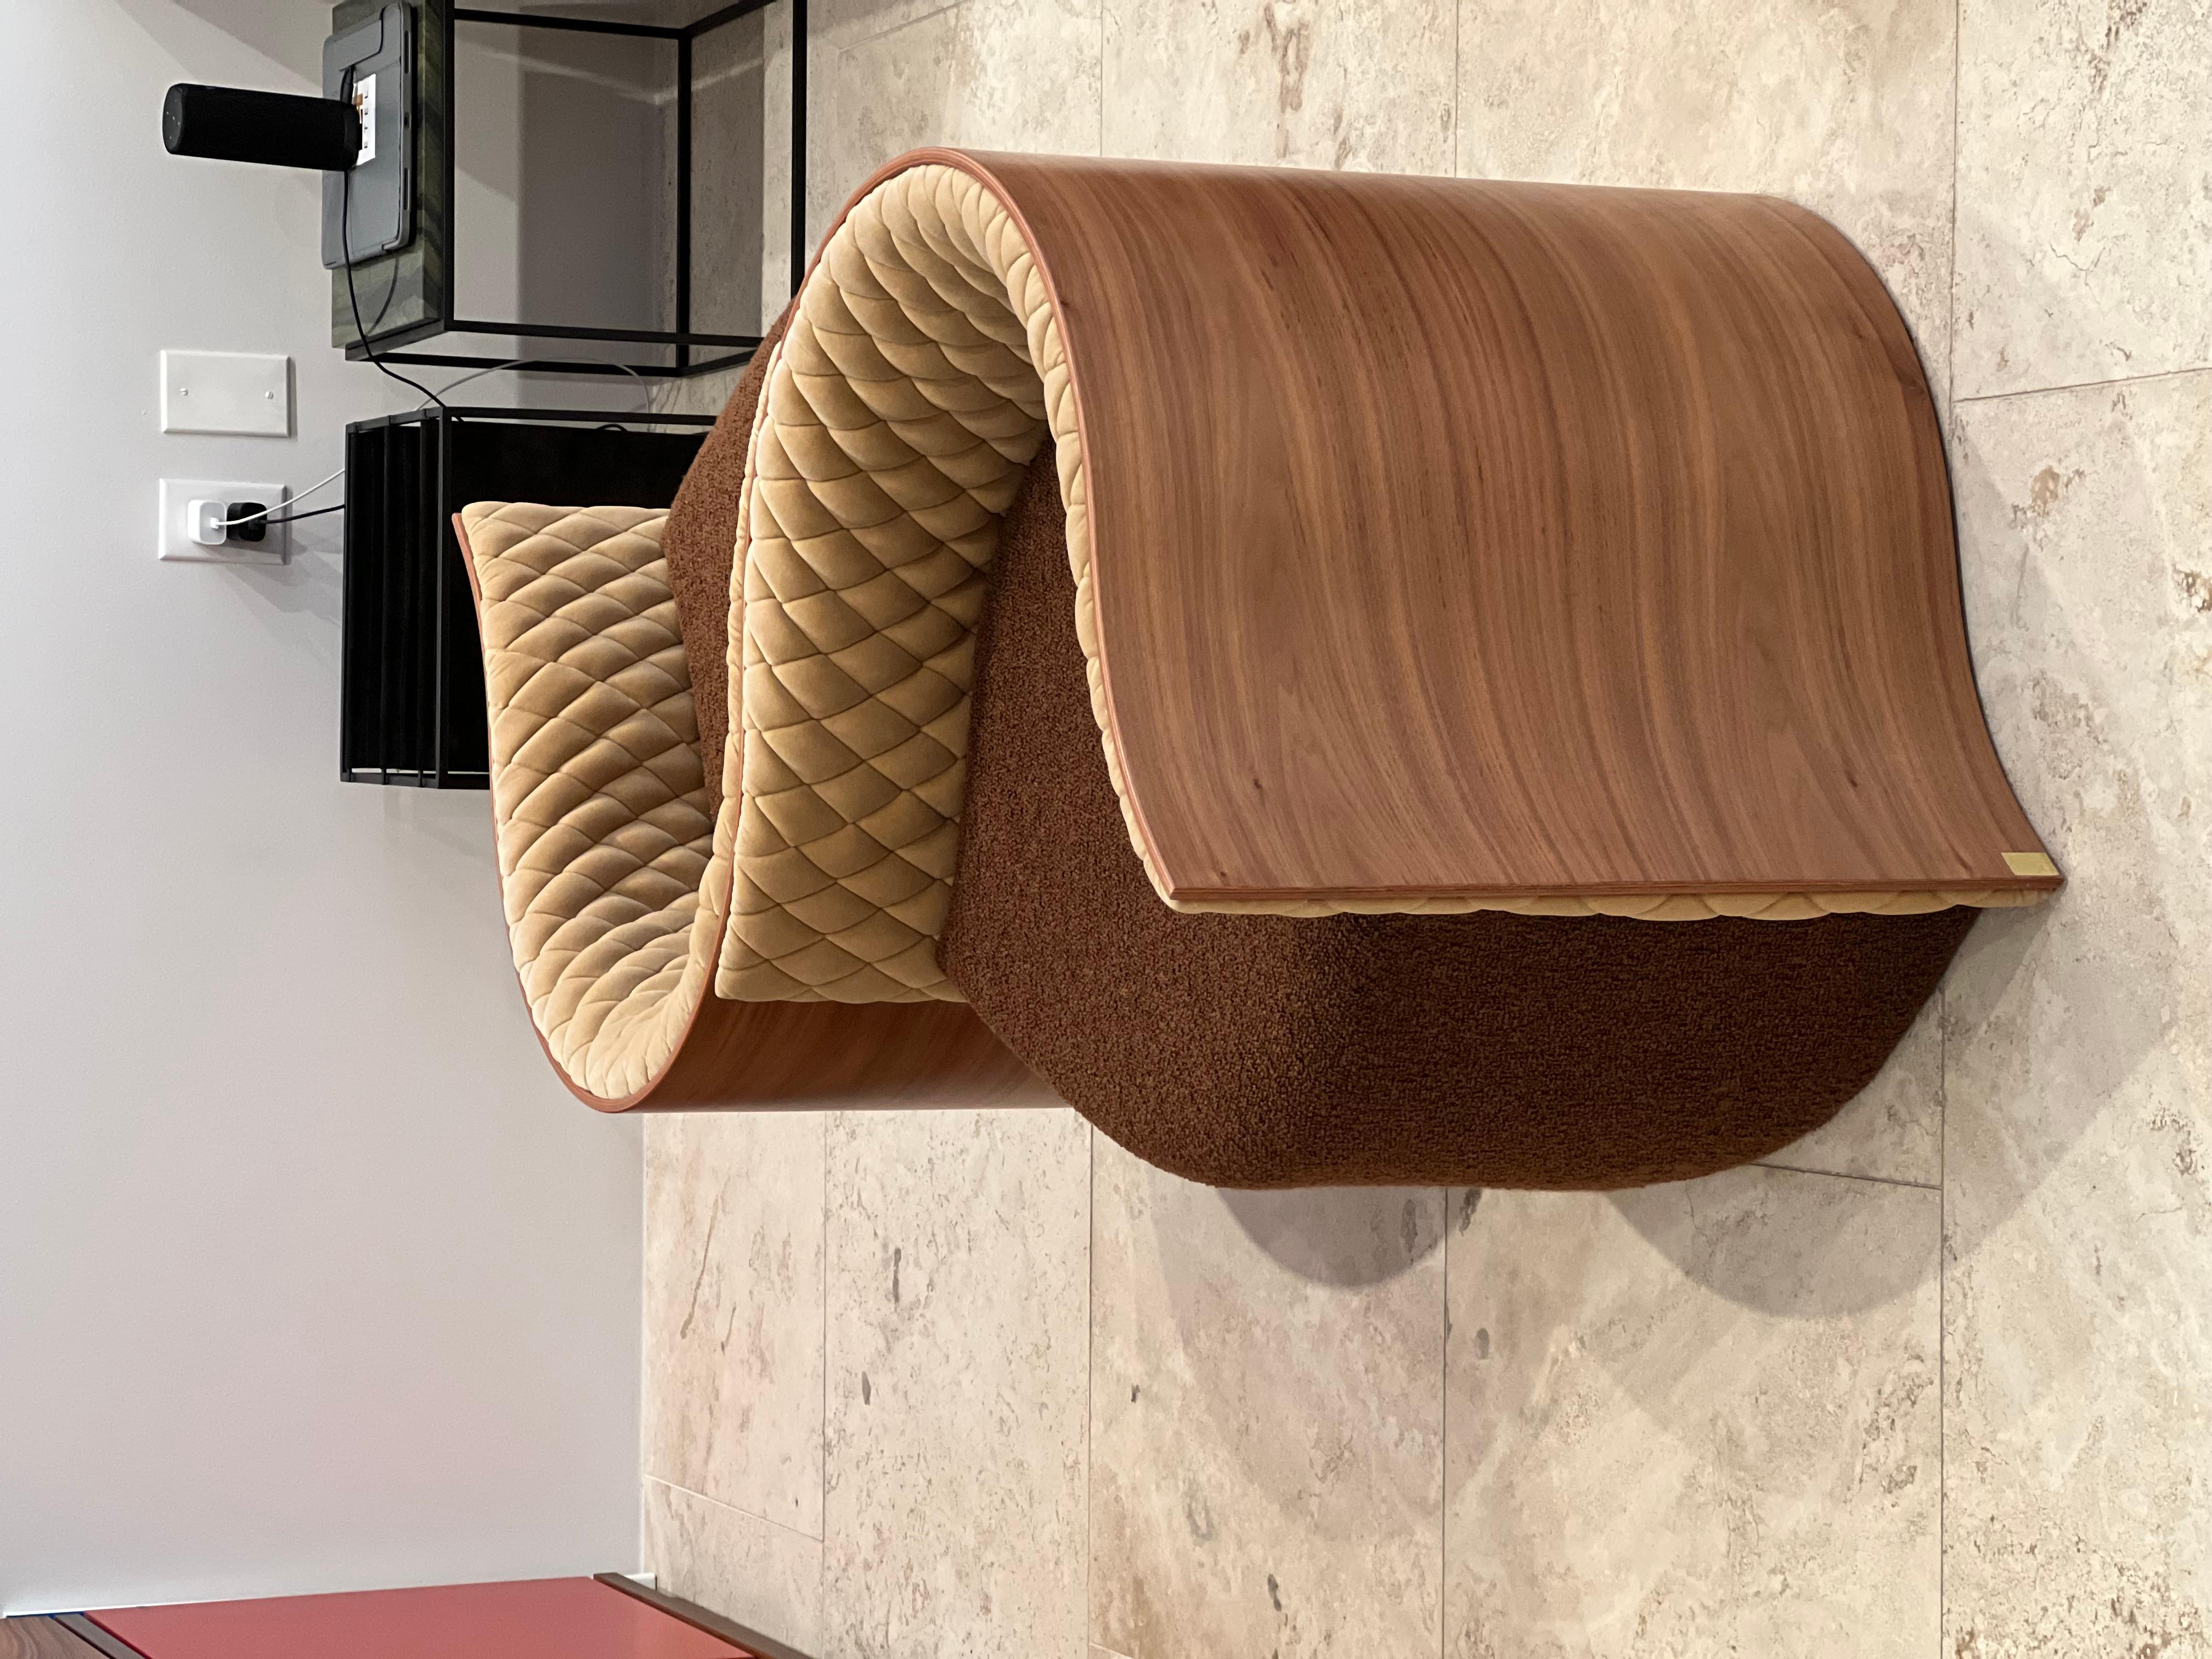 Girandola Bench
A sinuous volume designed by a curved wooden shape welcomes a seat wrapped in quilted velvet upholstery. The Paraíso armchair appears light, suspended on slender metal cylinders. It was the first piece in the collection that I